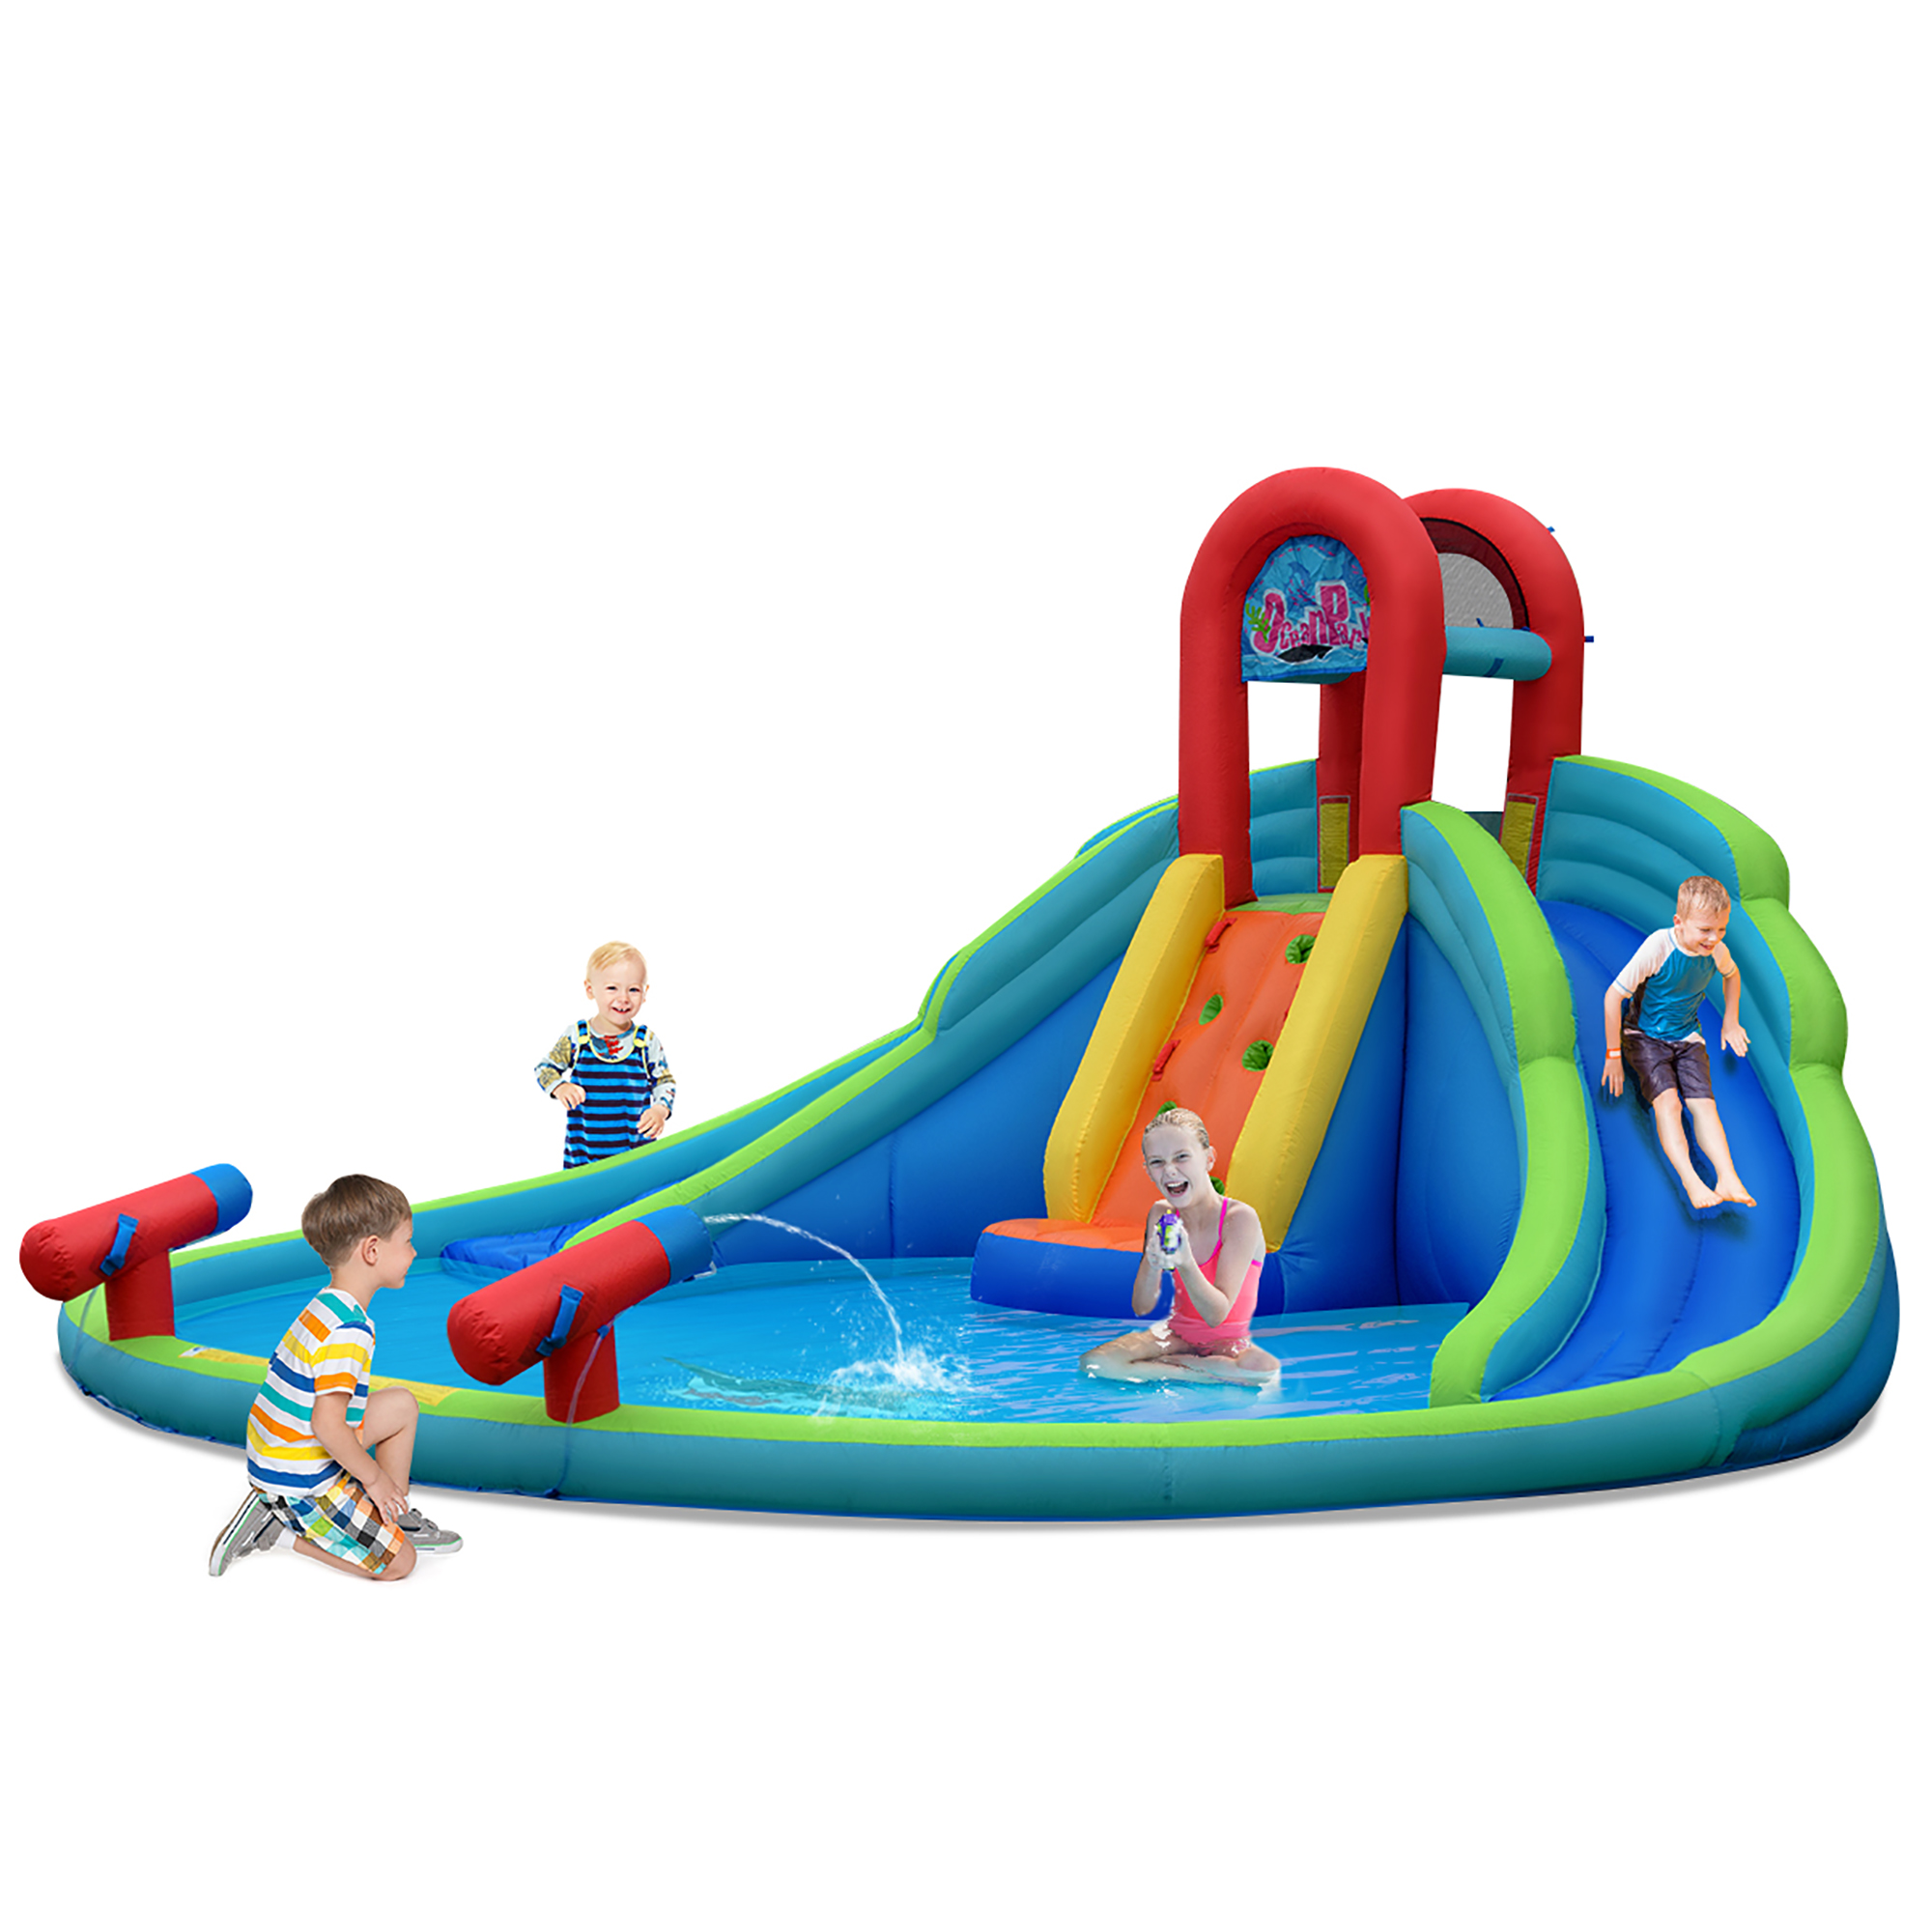 Costway Inflatable Bounce House Kids Water Splash Pool Dual Slides Climbing Wall without Blower - image 1 of 10